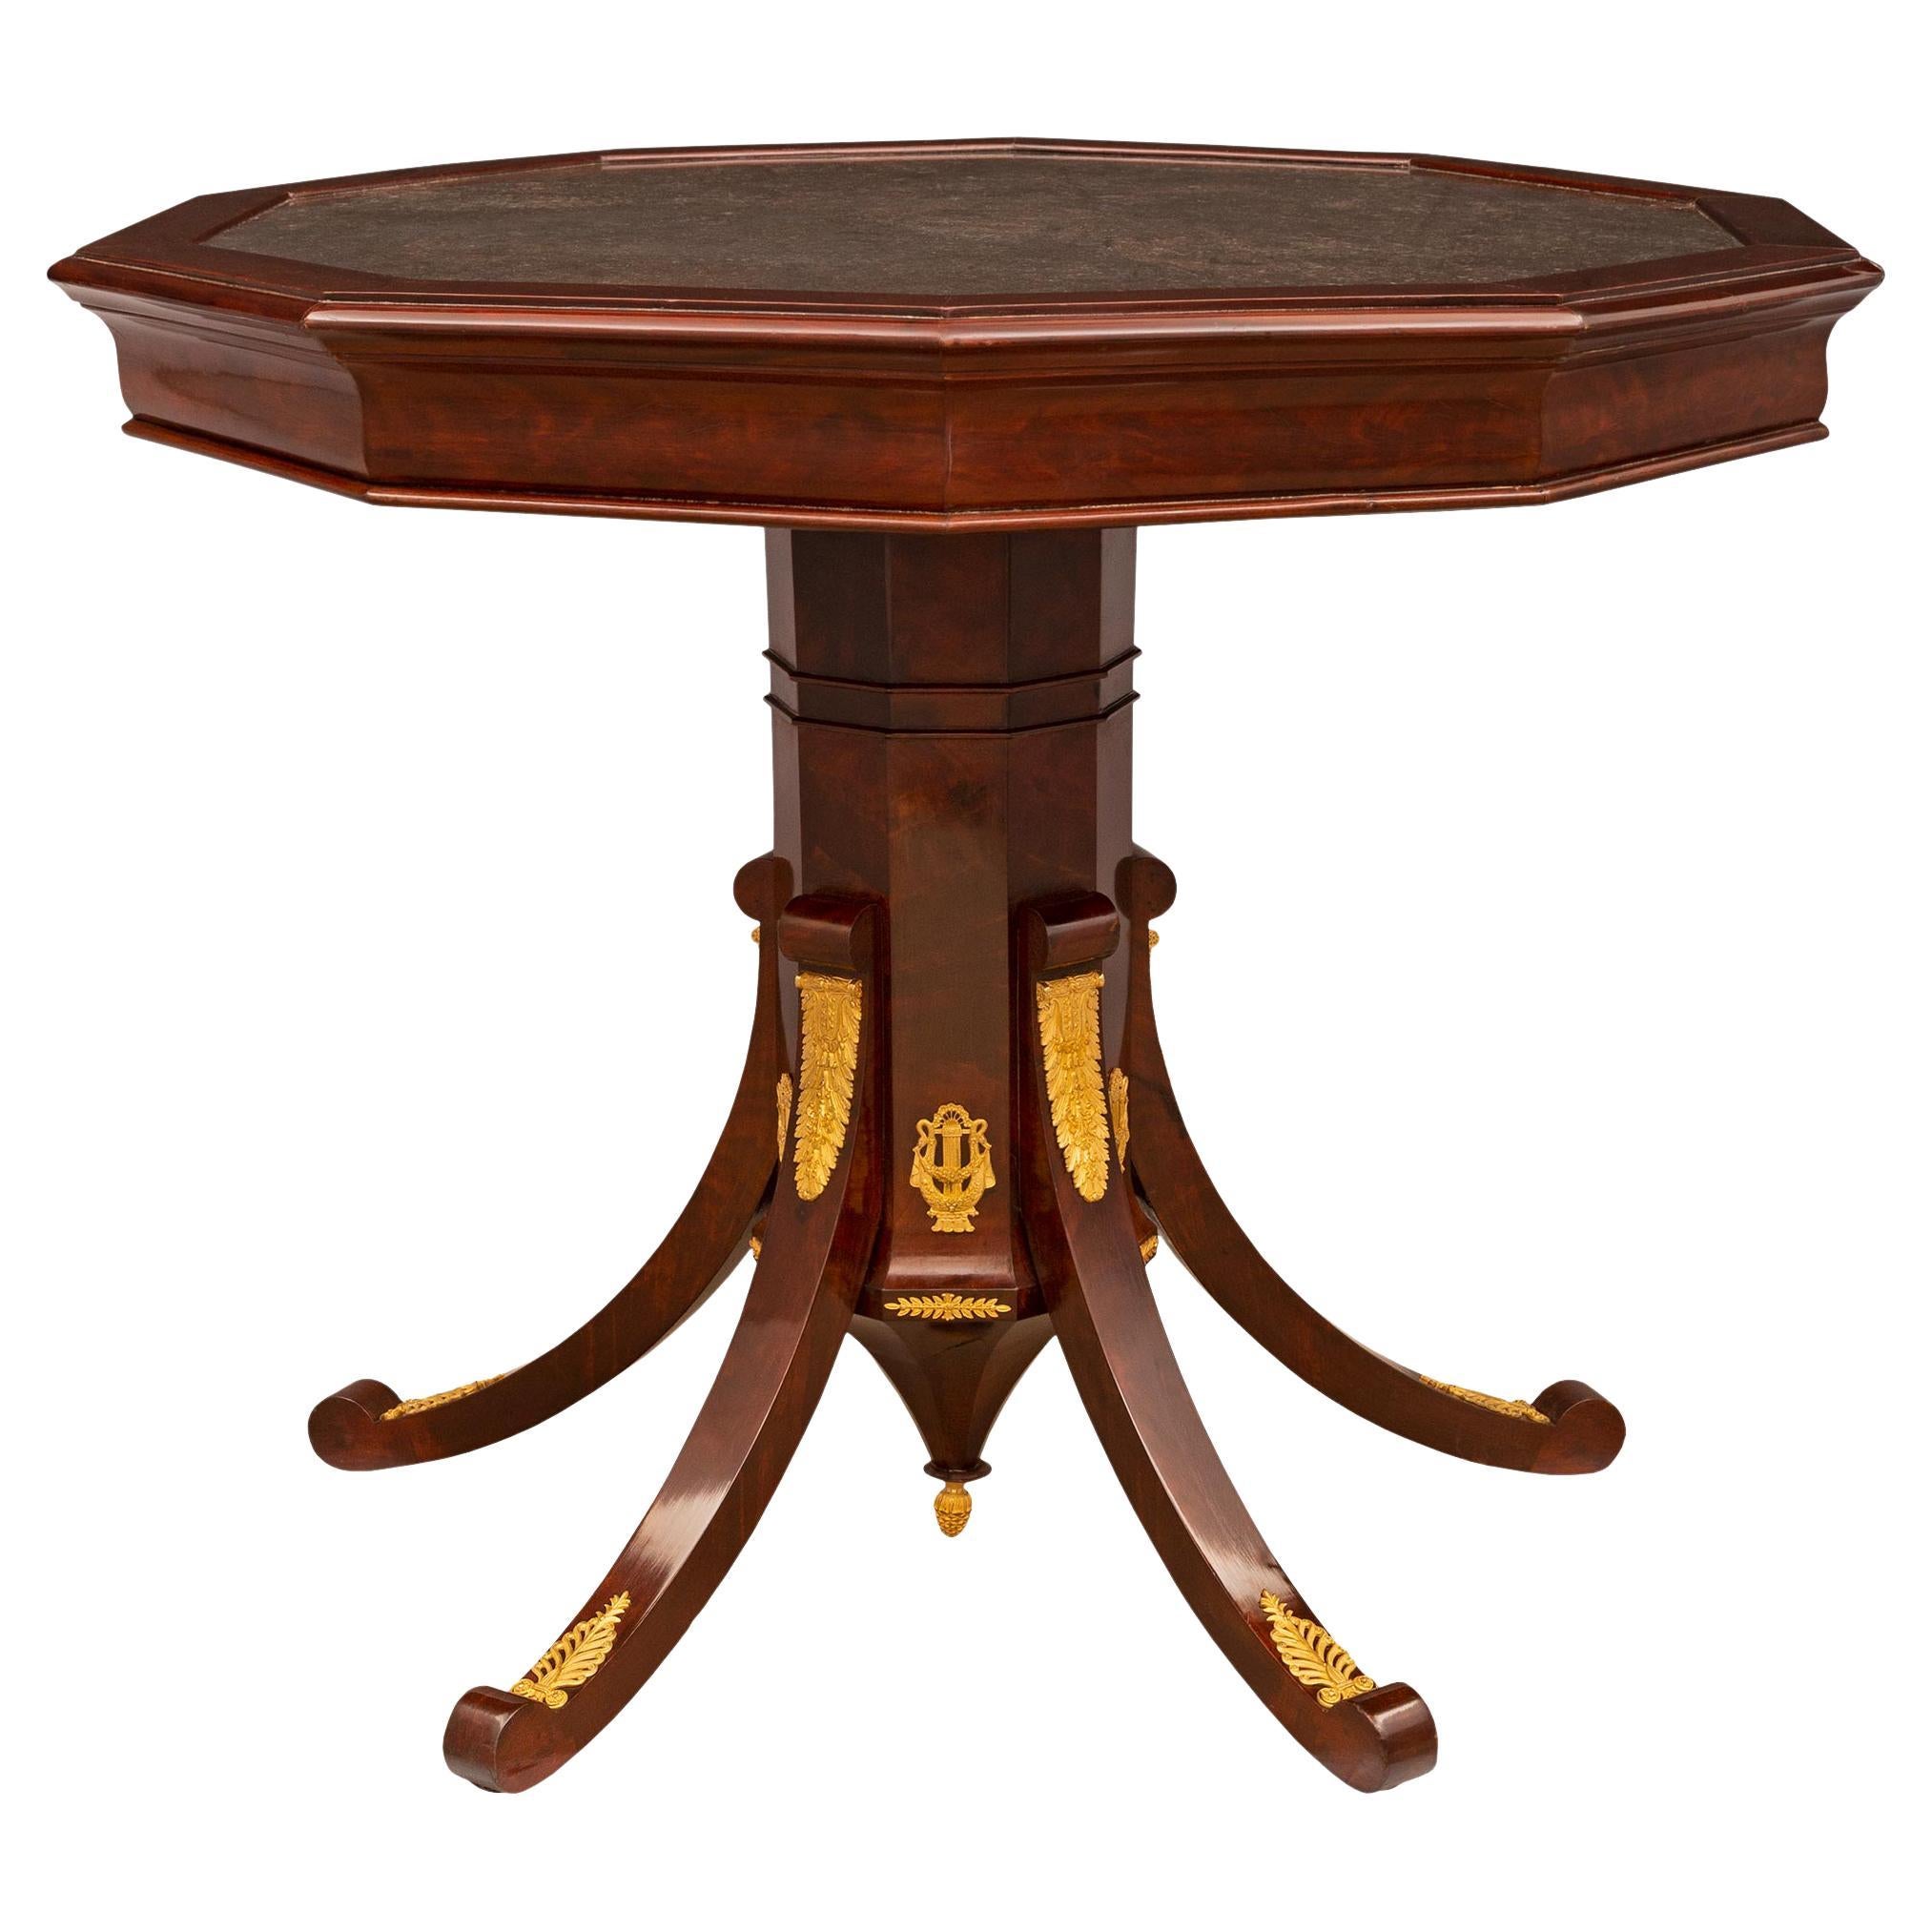 Italian 19th Century Neoclassical Empire Style Mahogany and Ormolu Center Table For Sale